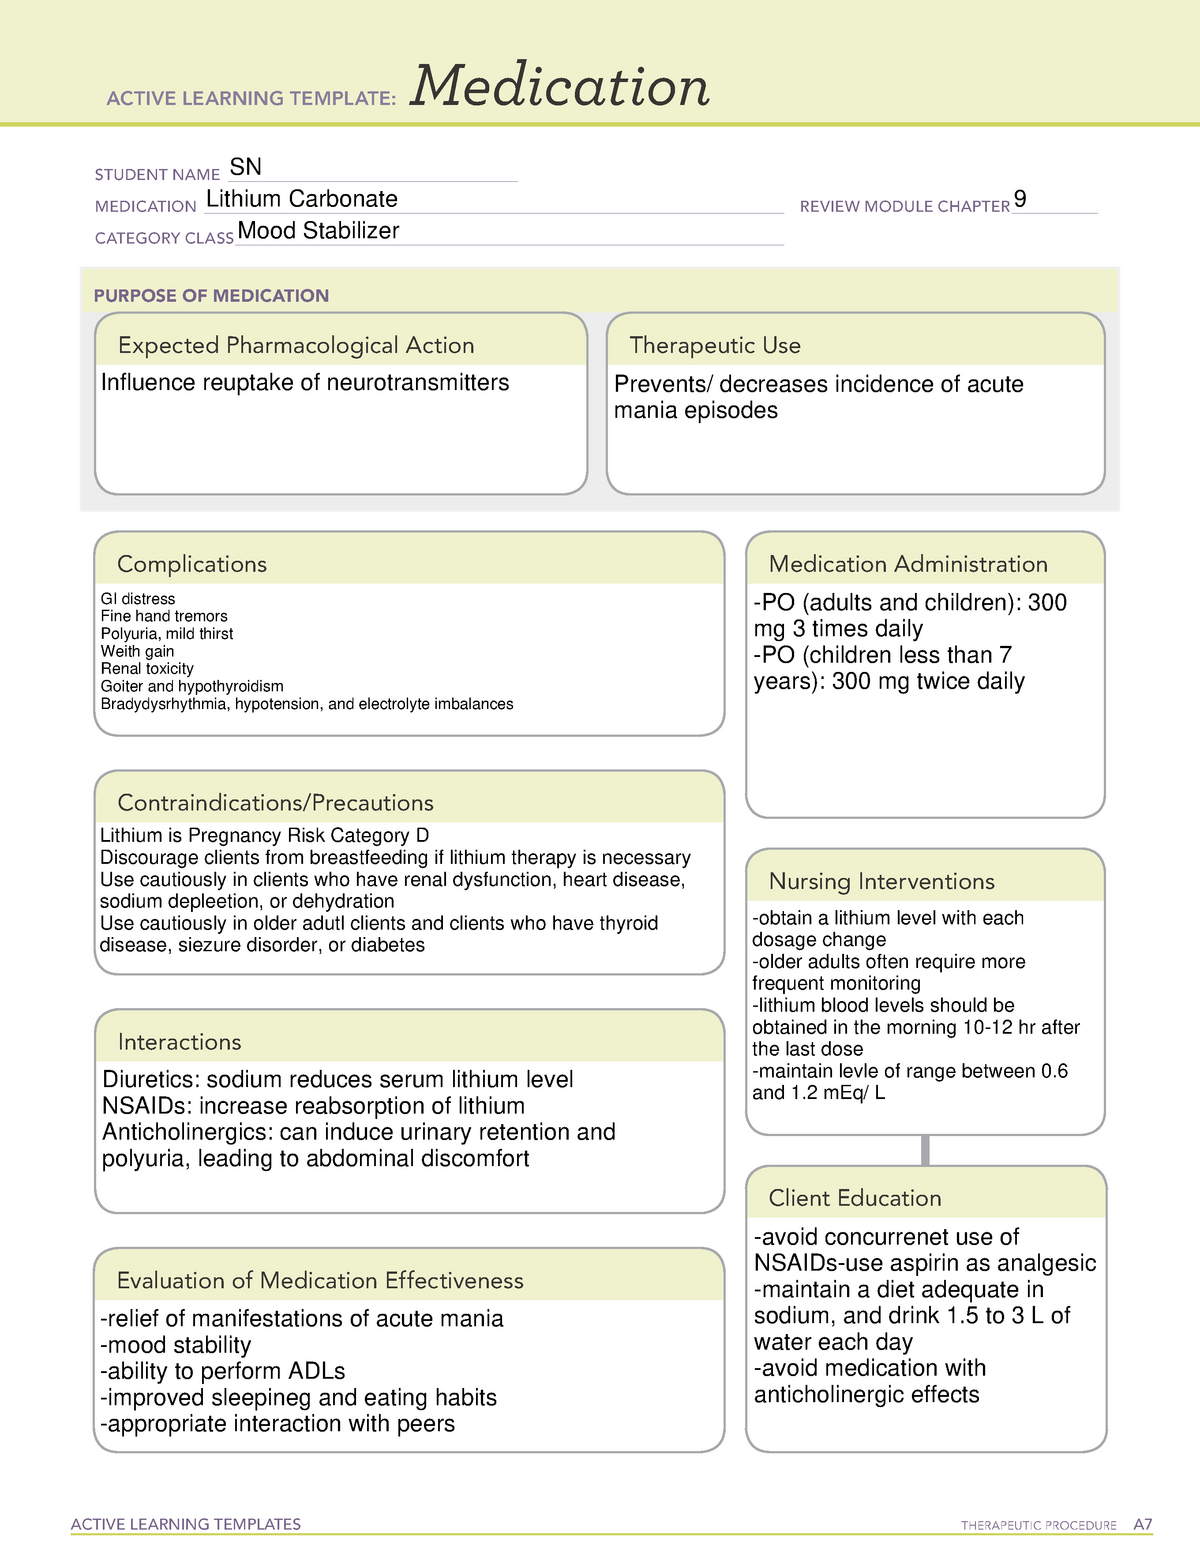 Active Learning Template medication ACTIVE LEARNING TEMPLATES